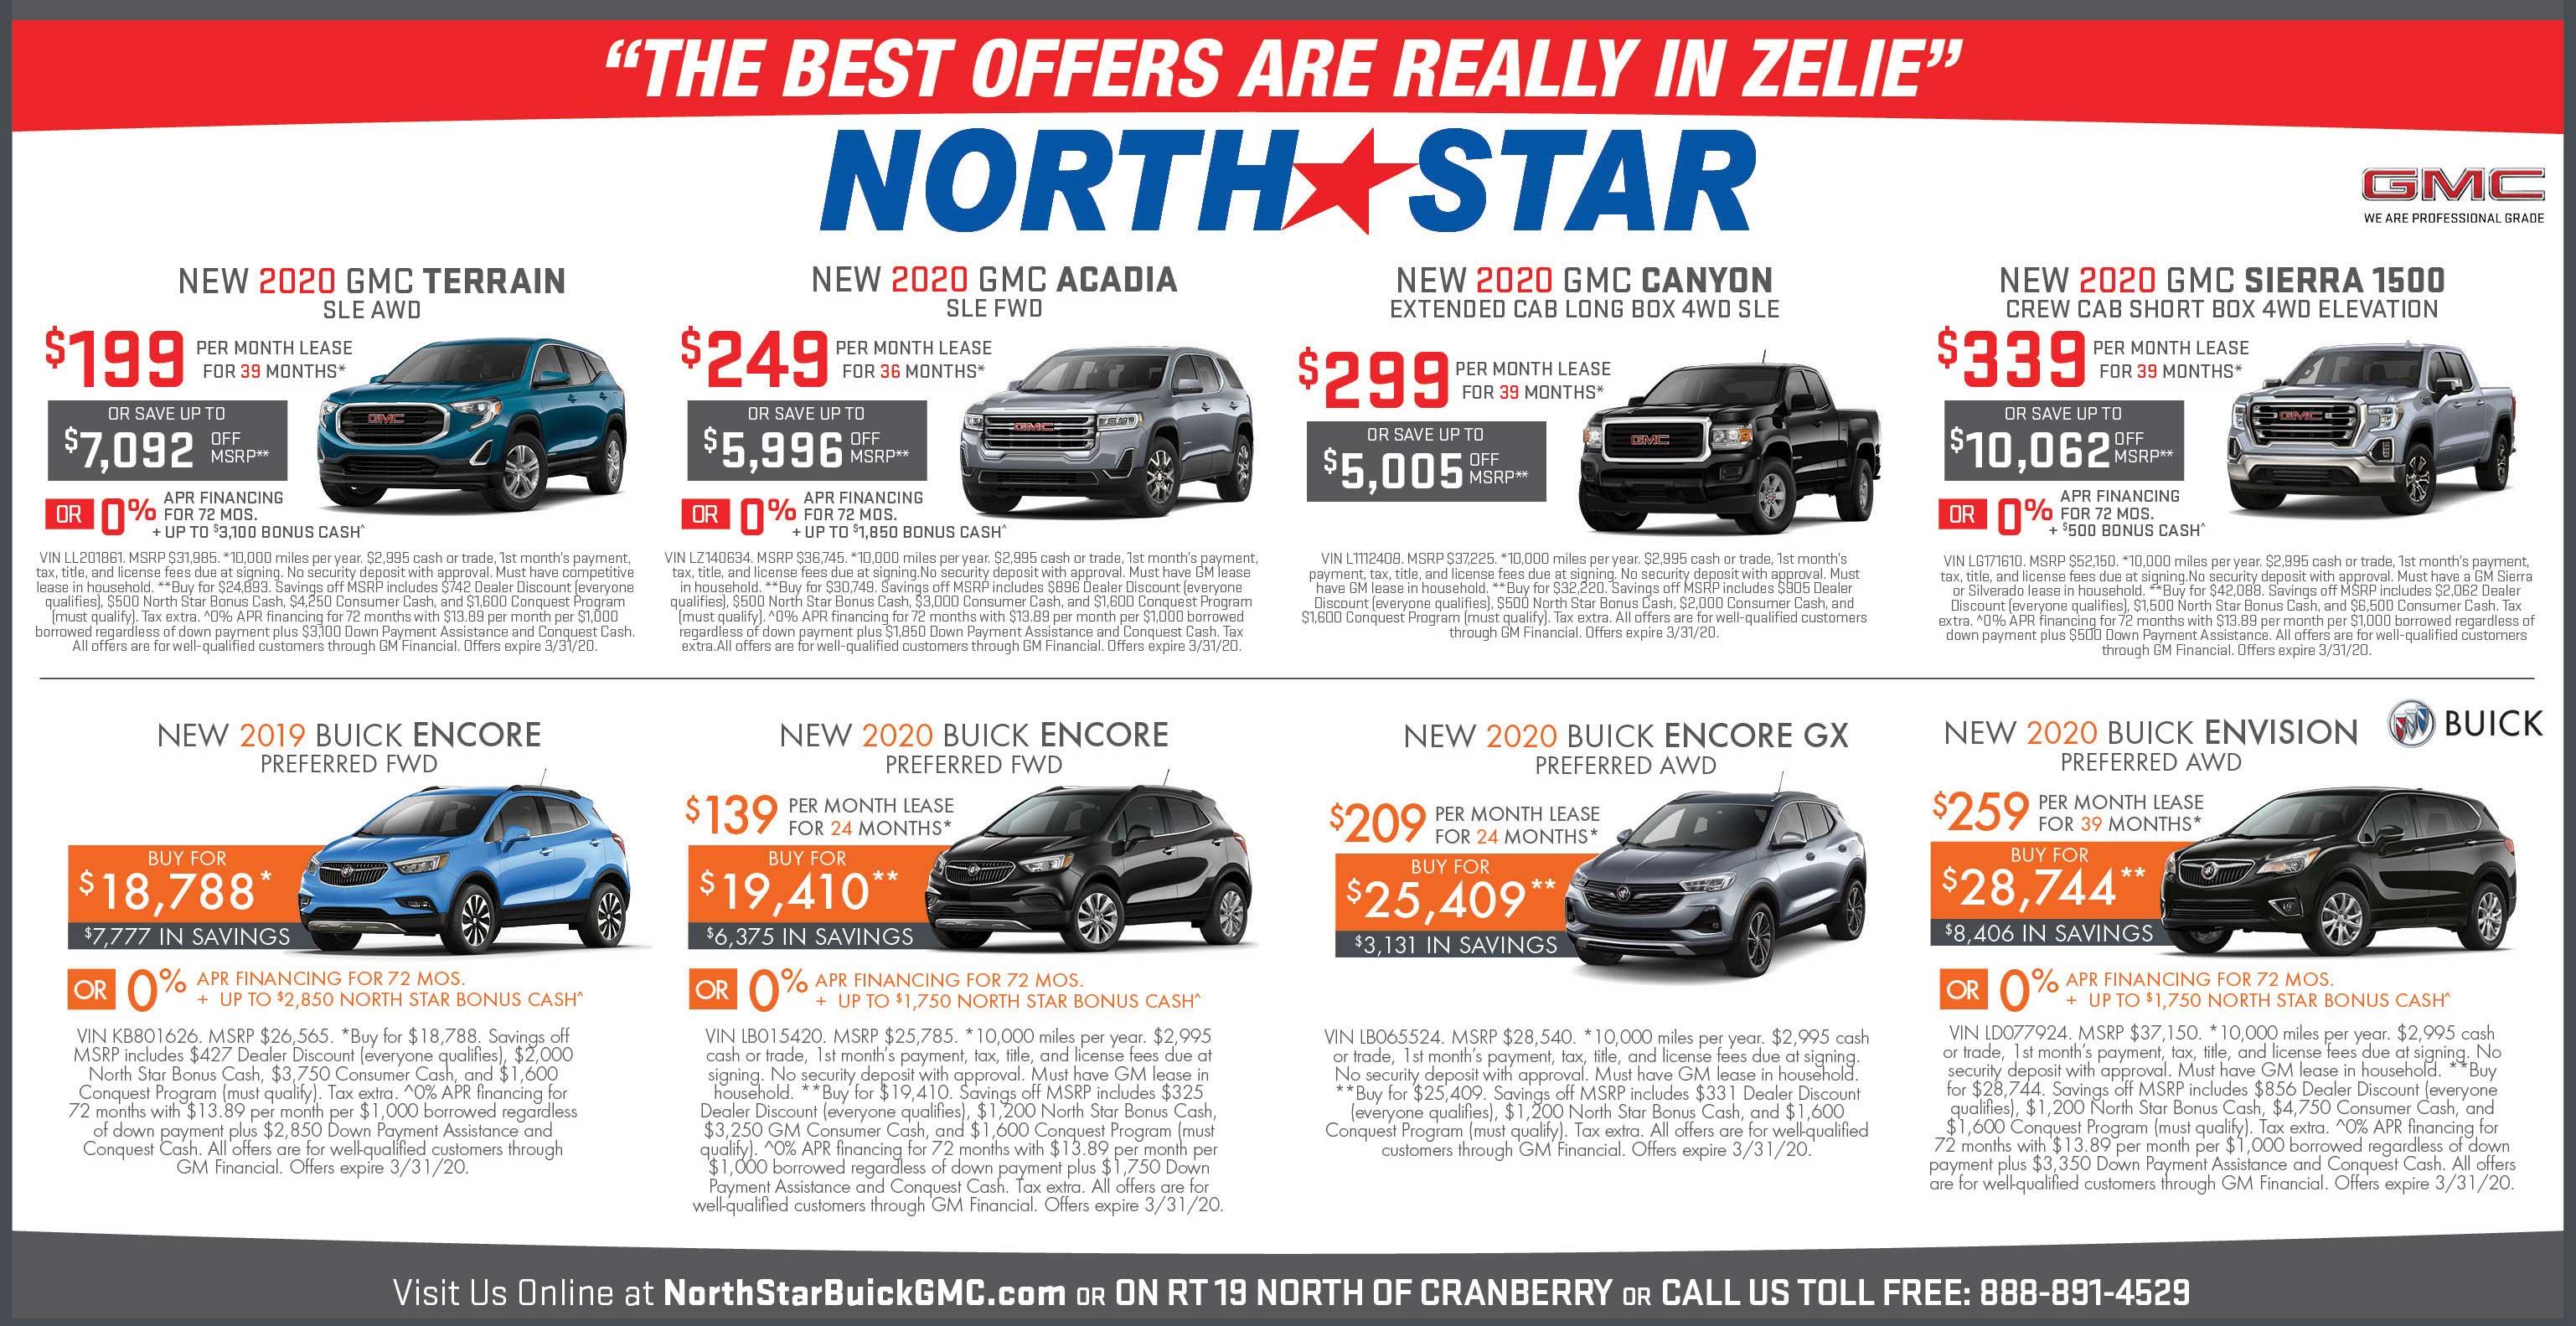 Monthly Newspaper print ad - includes several lease and purchase offers